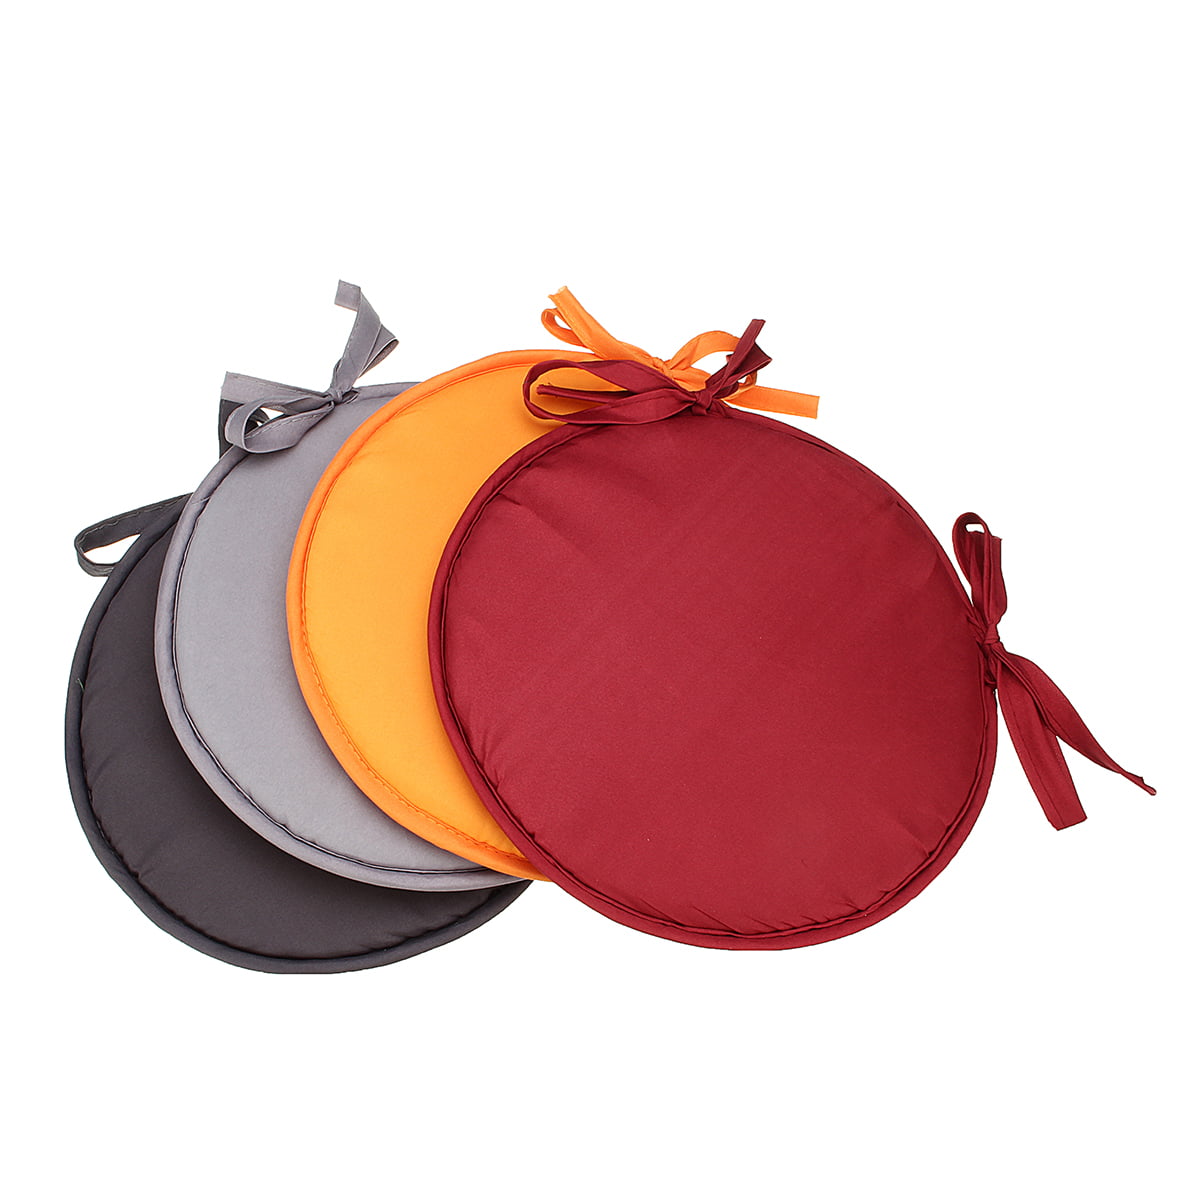 Grtsunsea Round Seat Cushion with Handles Chair Pad Bistro